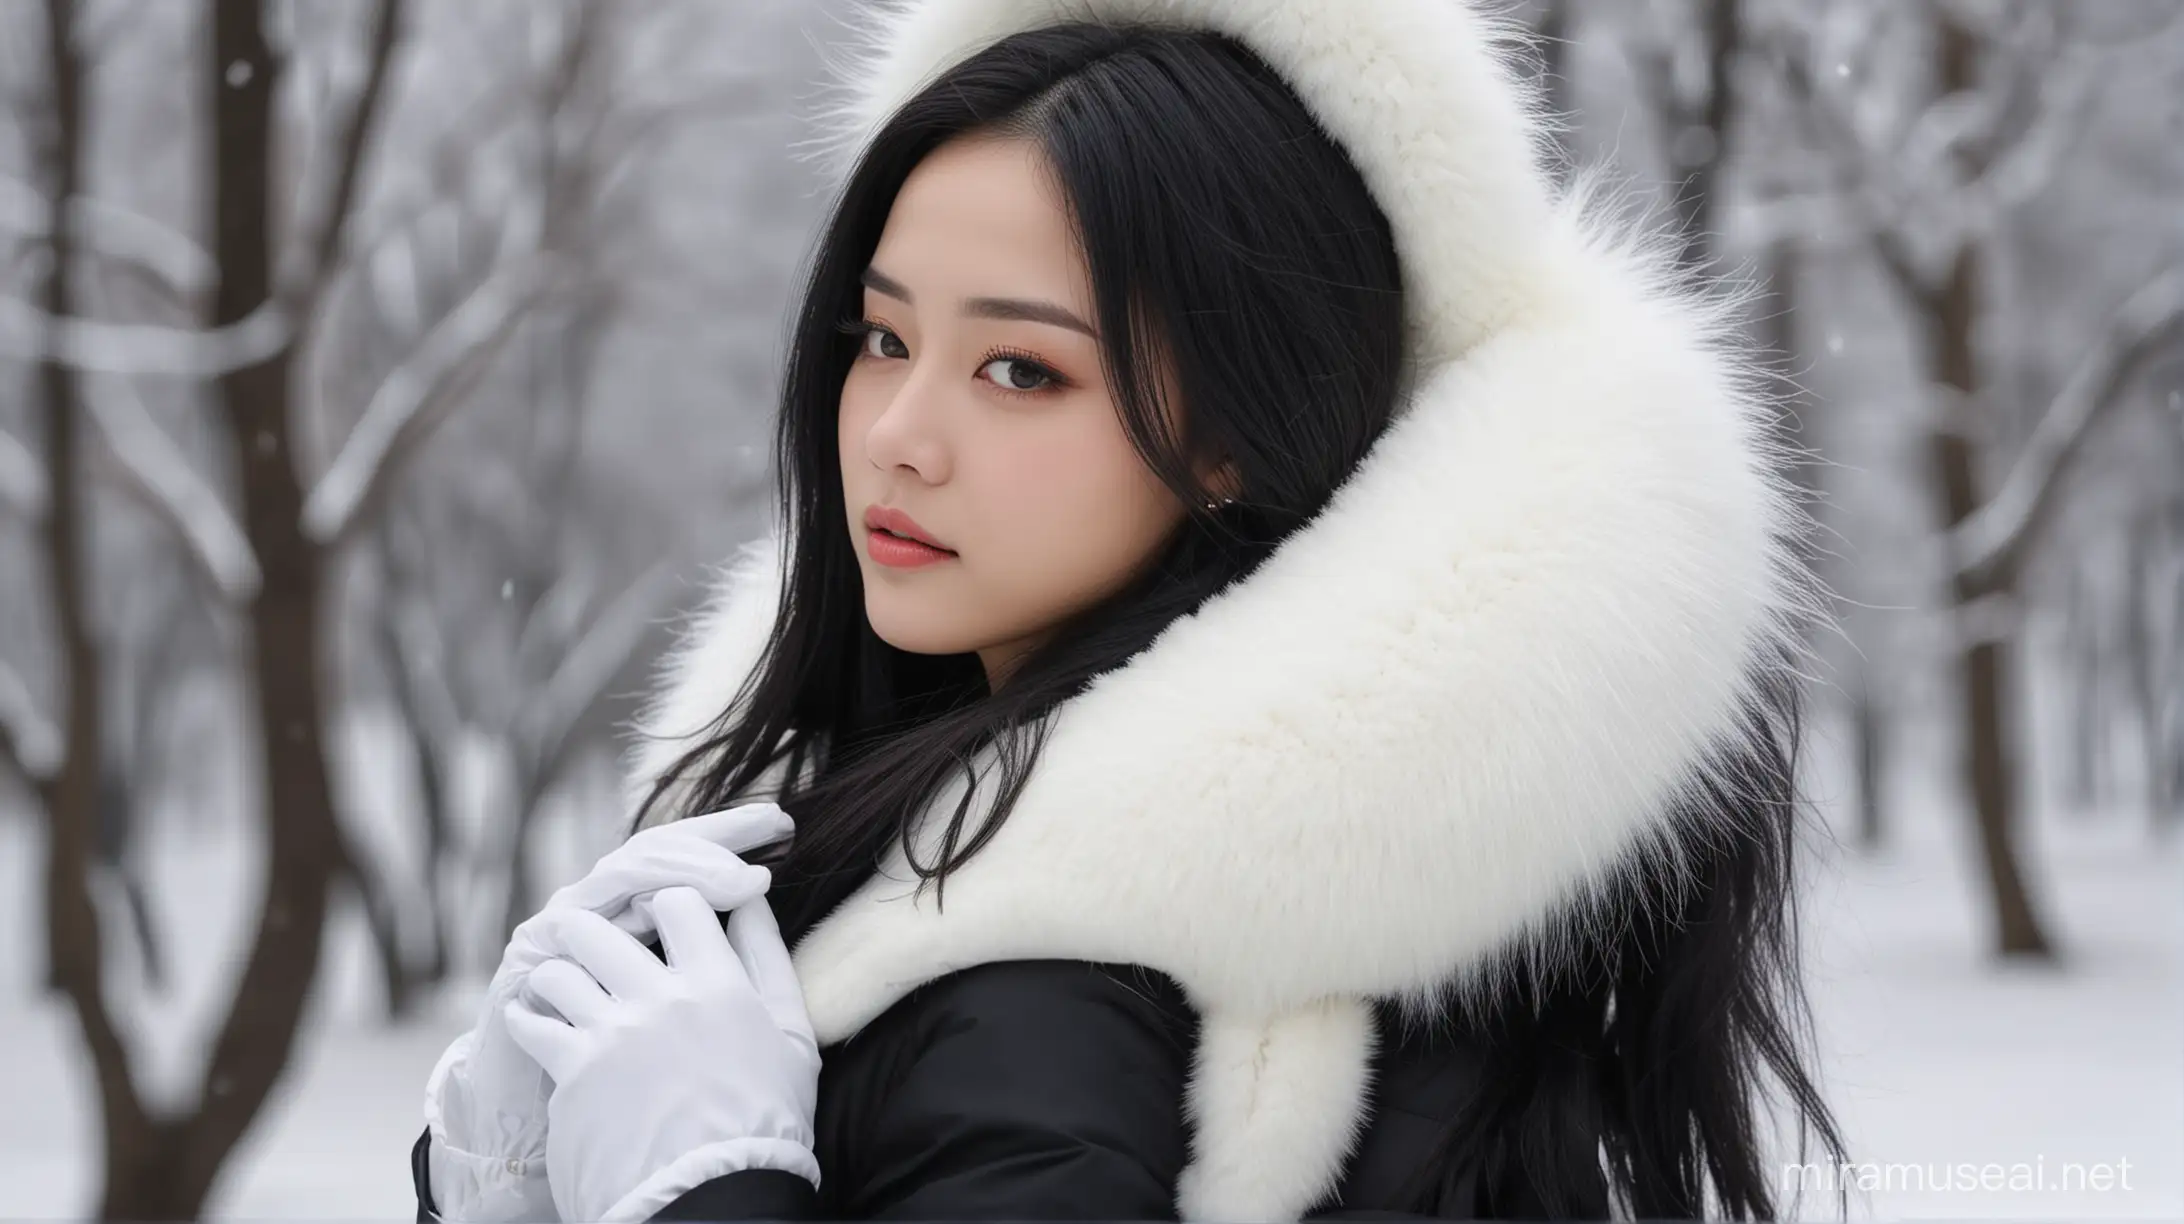 Elegant Woman in Snow White Fur Collar Down Jacket and Winter Accessories